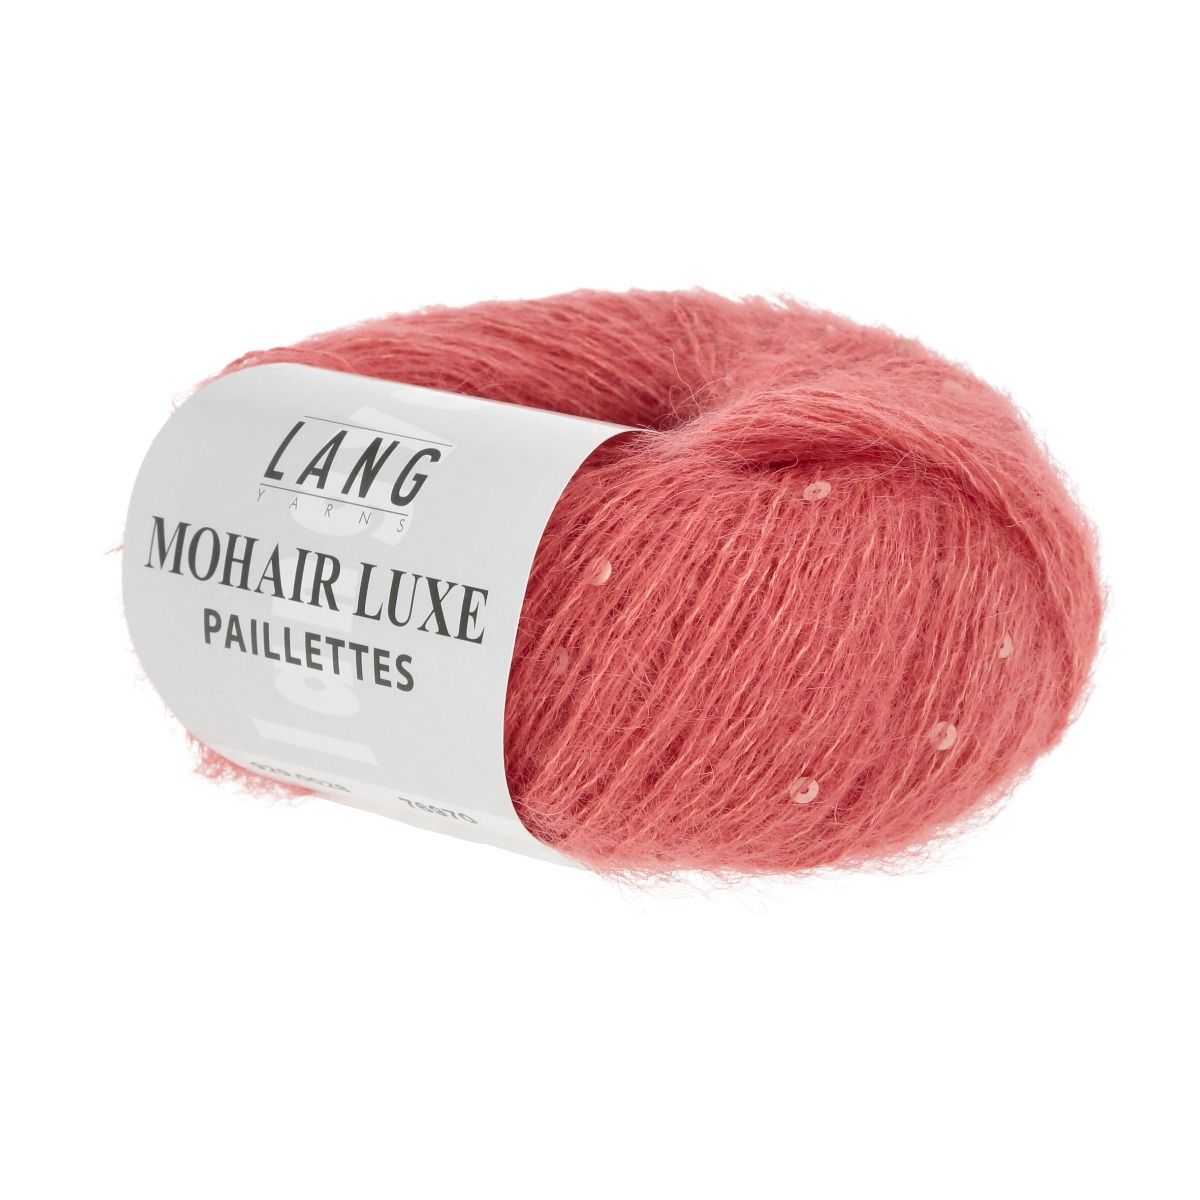 Mohair Luxe Paillettes Lang Yarns